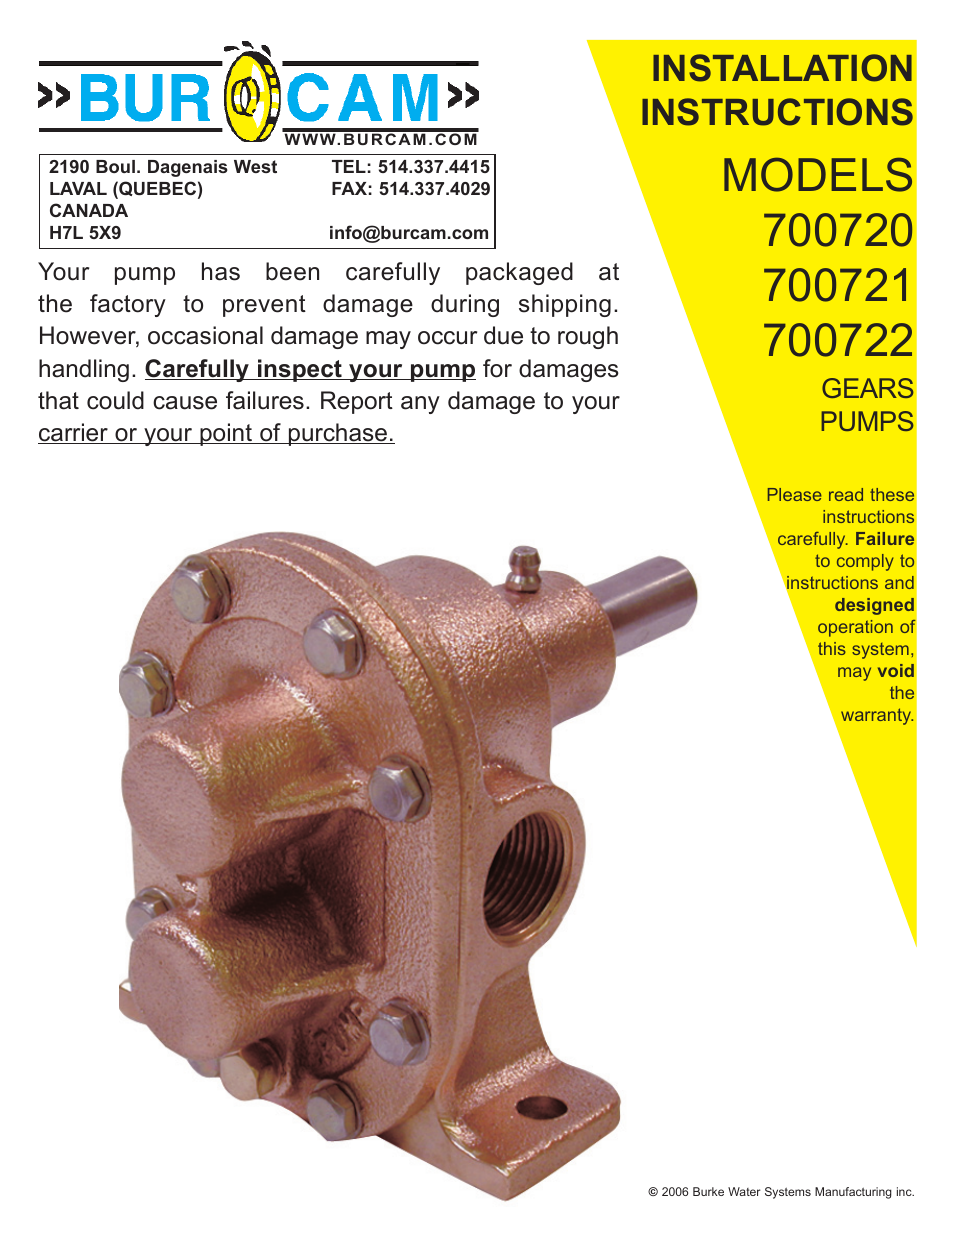 700722 BRASS GEAR PUMP 1 SUCTION AND DISCHARGE